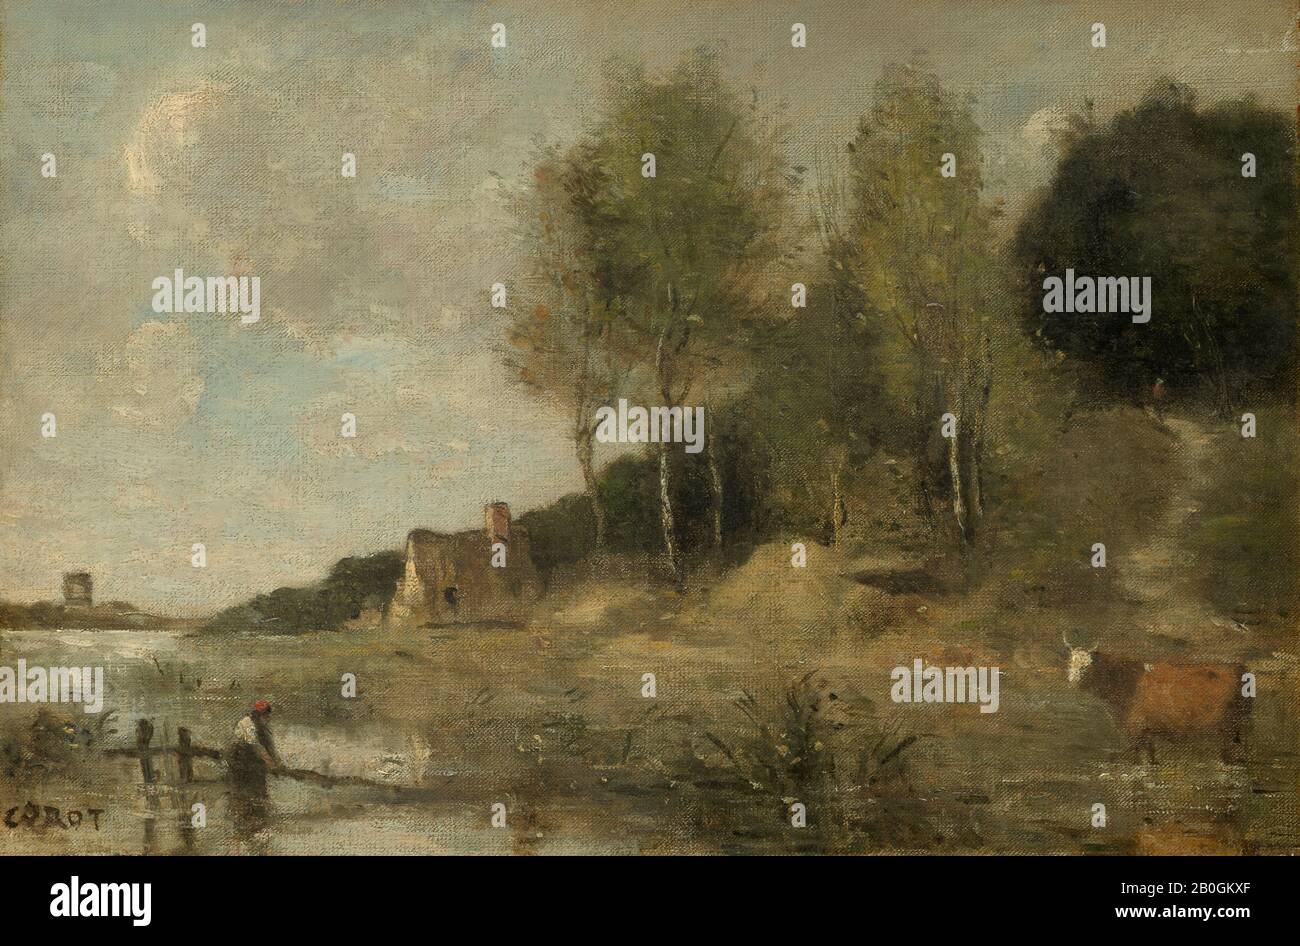 Imitator of Jean-Baptiste-Camille Corot, French, 1796–1875, Marsh at Bove, near Amiens, 19th century, Oil on canvas, 9 7/16 x 13 7/8 in. (24 x 35.3 cm Stock Photo